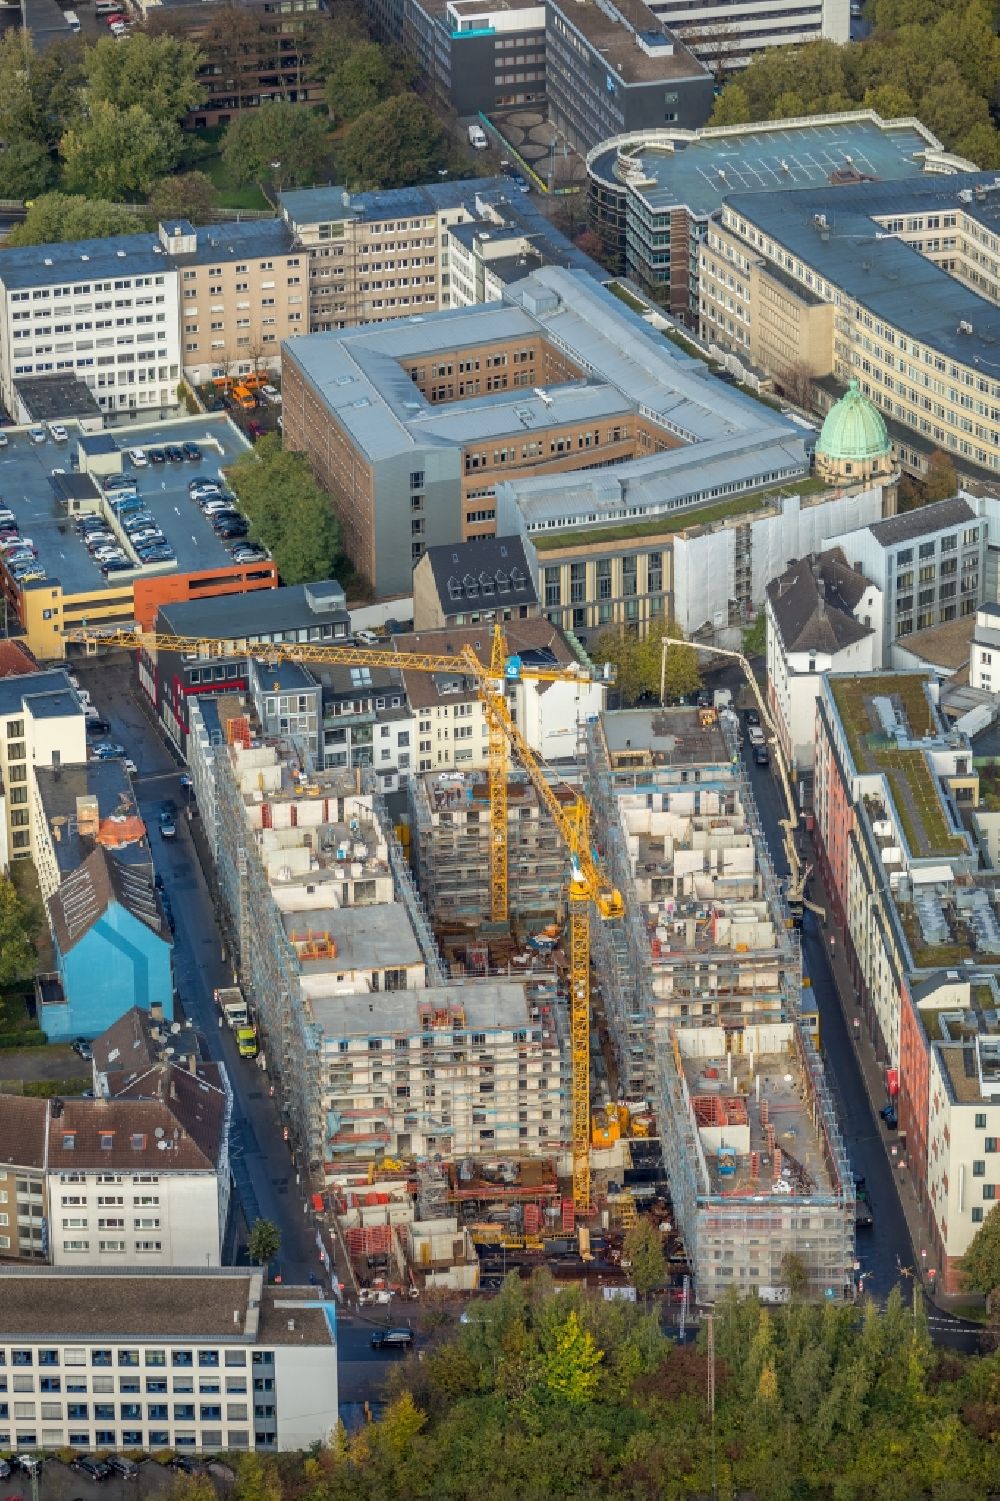 Essen from above - Construction site to build a new multi-family residential complex Selmastrasse - Henriettenstrasse - Hachestrasse in Essen in the state North Rhine-Westphalia